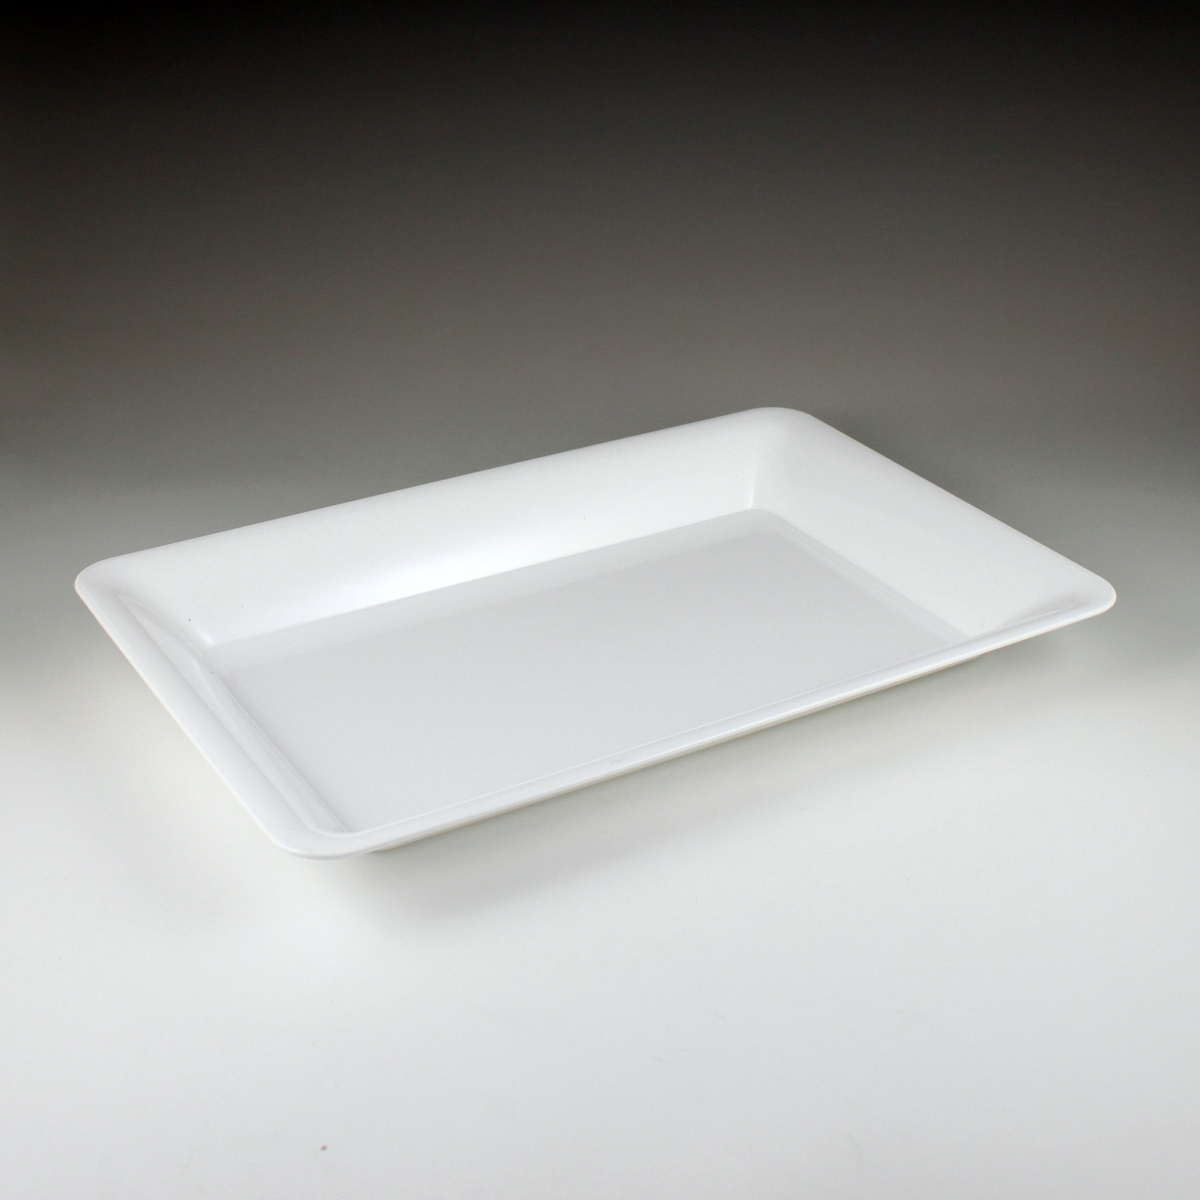 10" x 14" Sovereign Rectangular Tray Plastic Cups